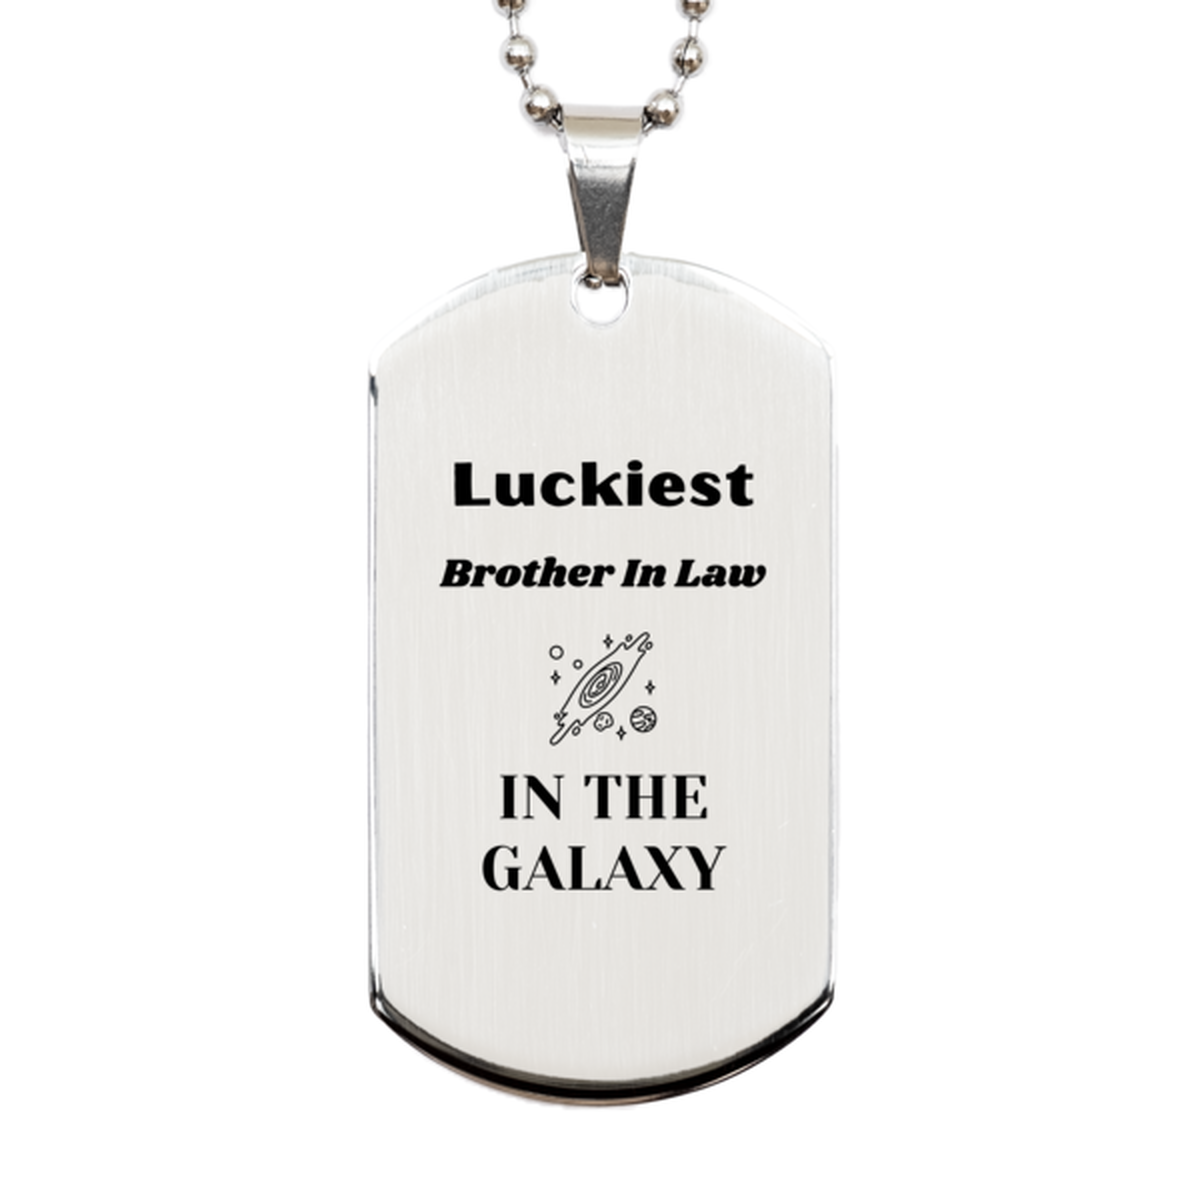 Luckiest Brother In Law in the Galaxy, To My Brother In Law Engraved Gifts, Christmas Brother In Law Silver Dog Tag Gifts, X-mas Birthday Unique Gifts For Brother In Law Men Women